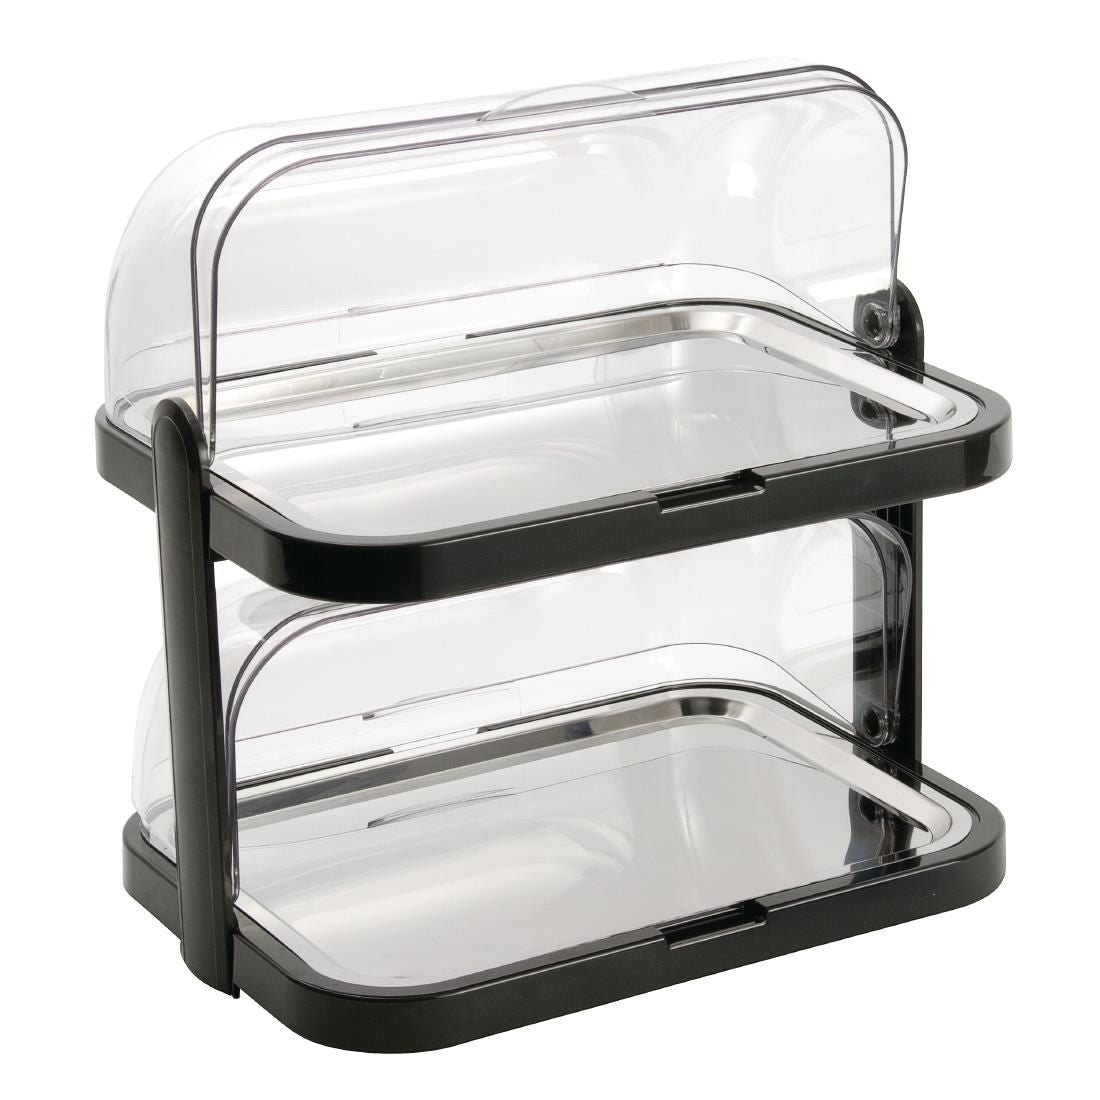 Double Decker Roll Top Cool Display Trays JD Catering Equipment Solutions Ltd